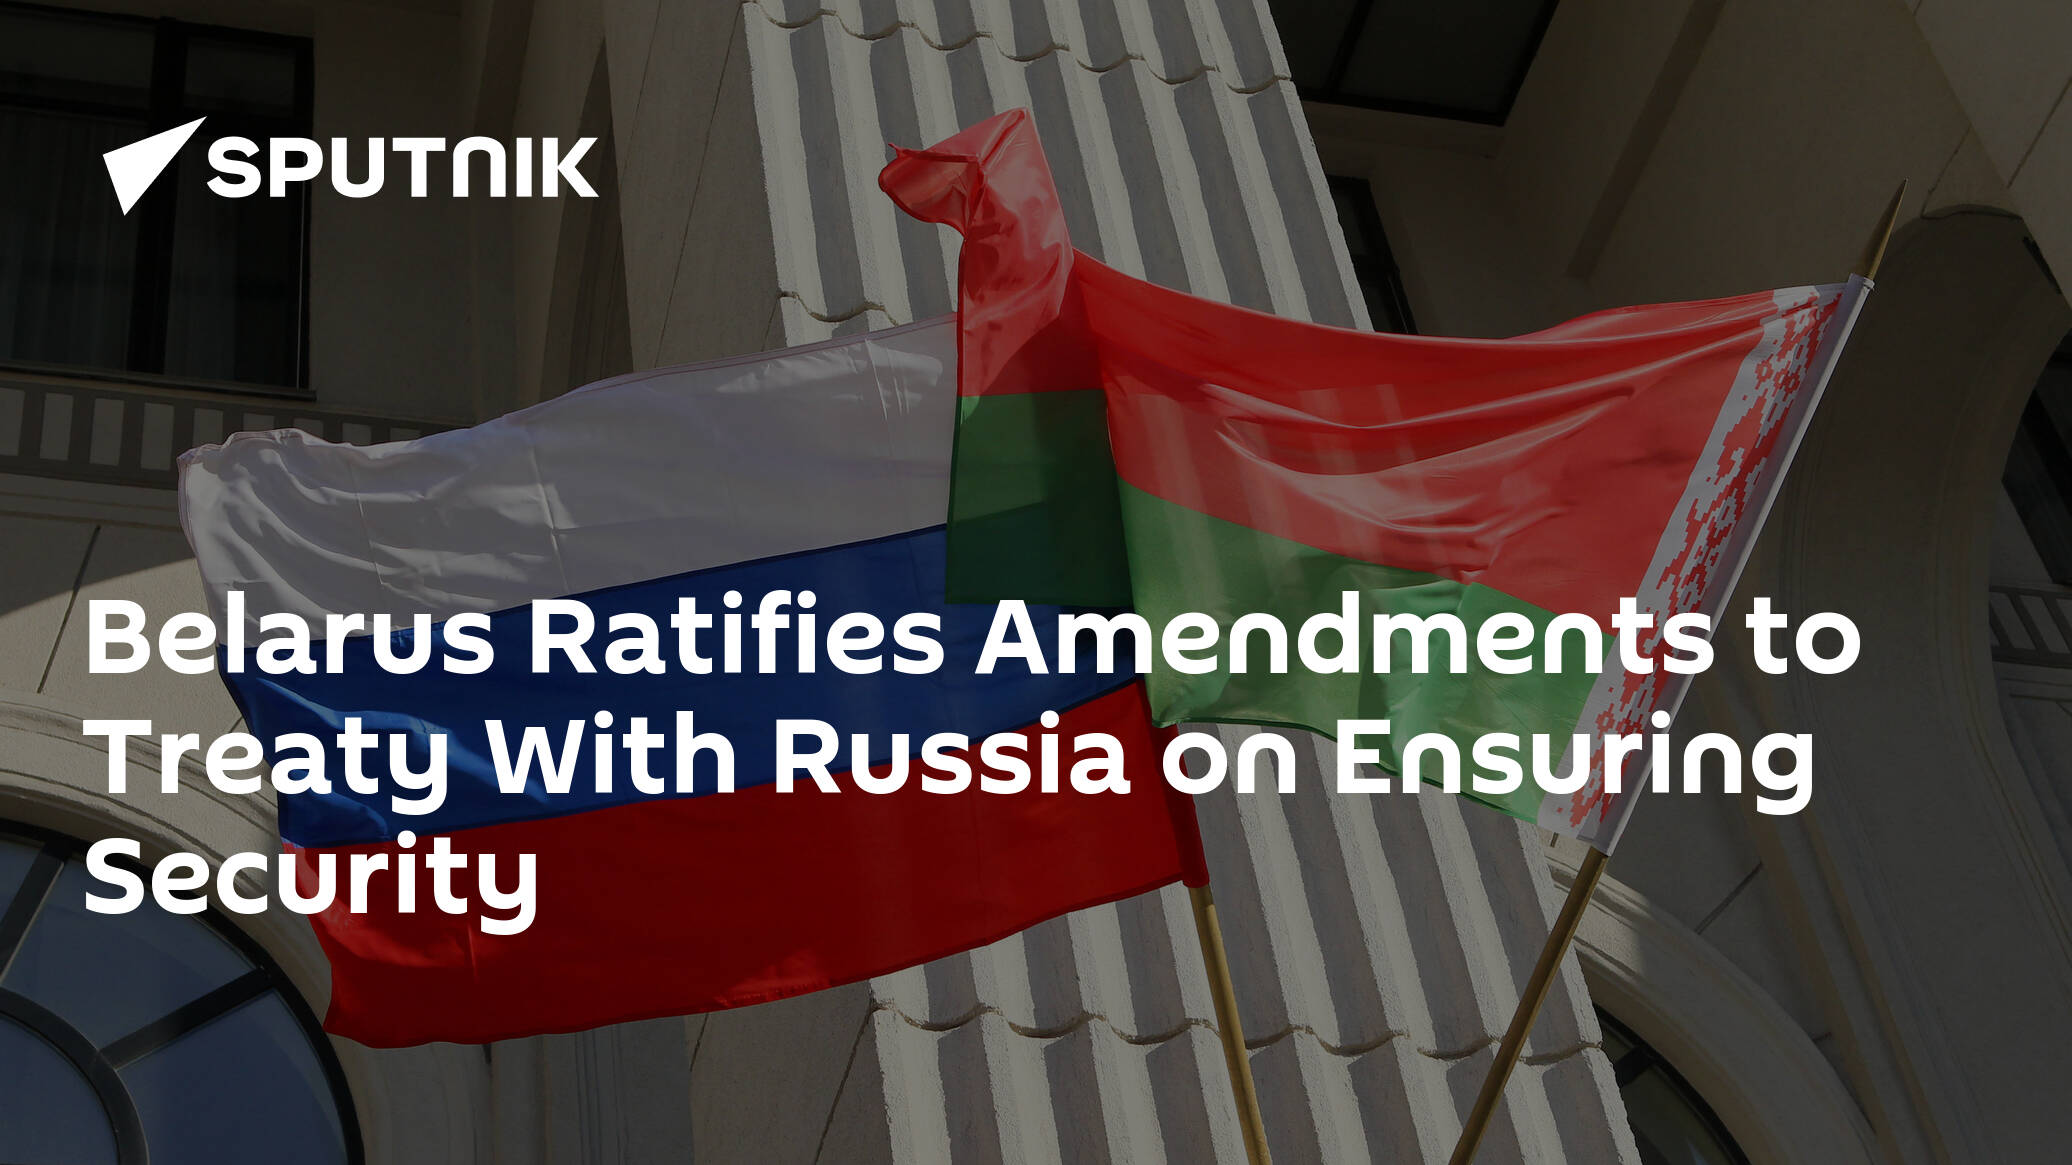 Belarus Ratifies Amendments to Treaty With Russia on Ensuring Security